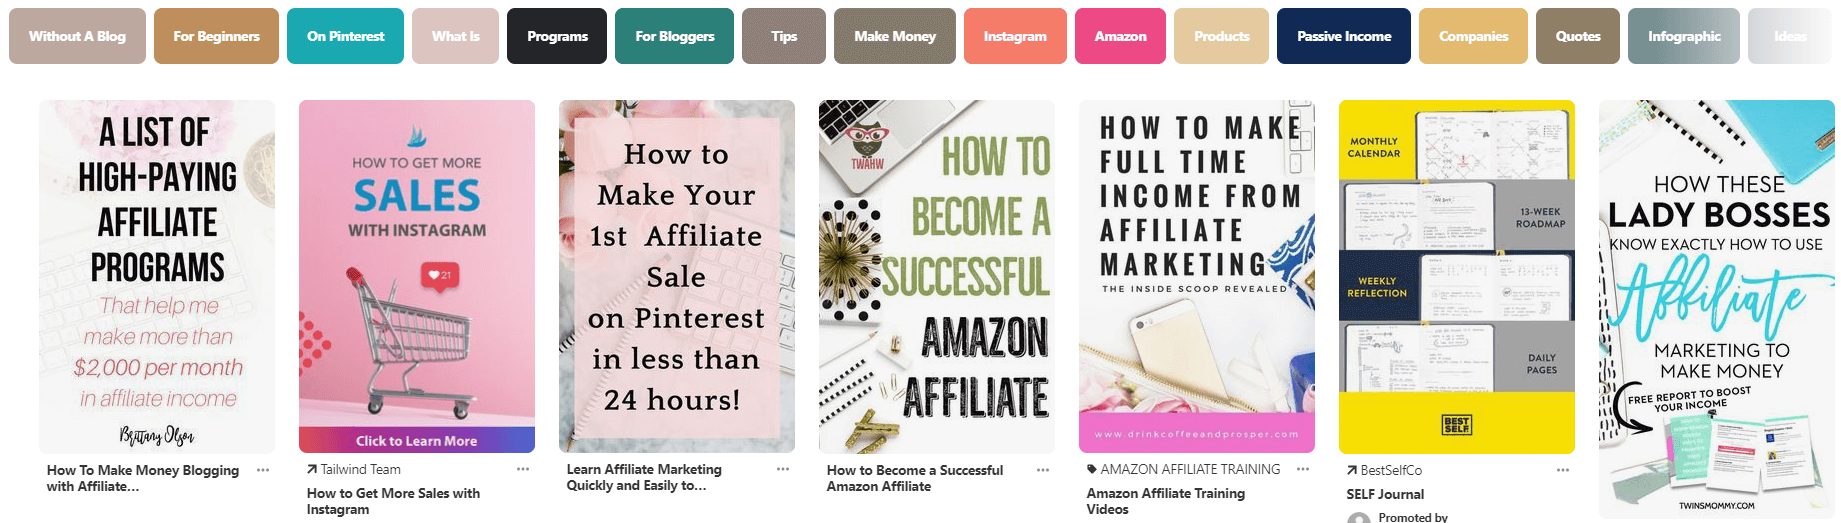 how to promote clickbank products on pinterest